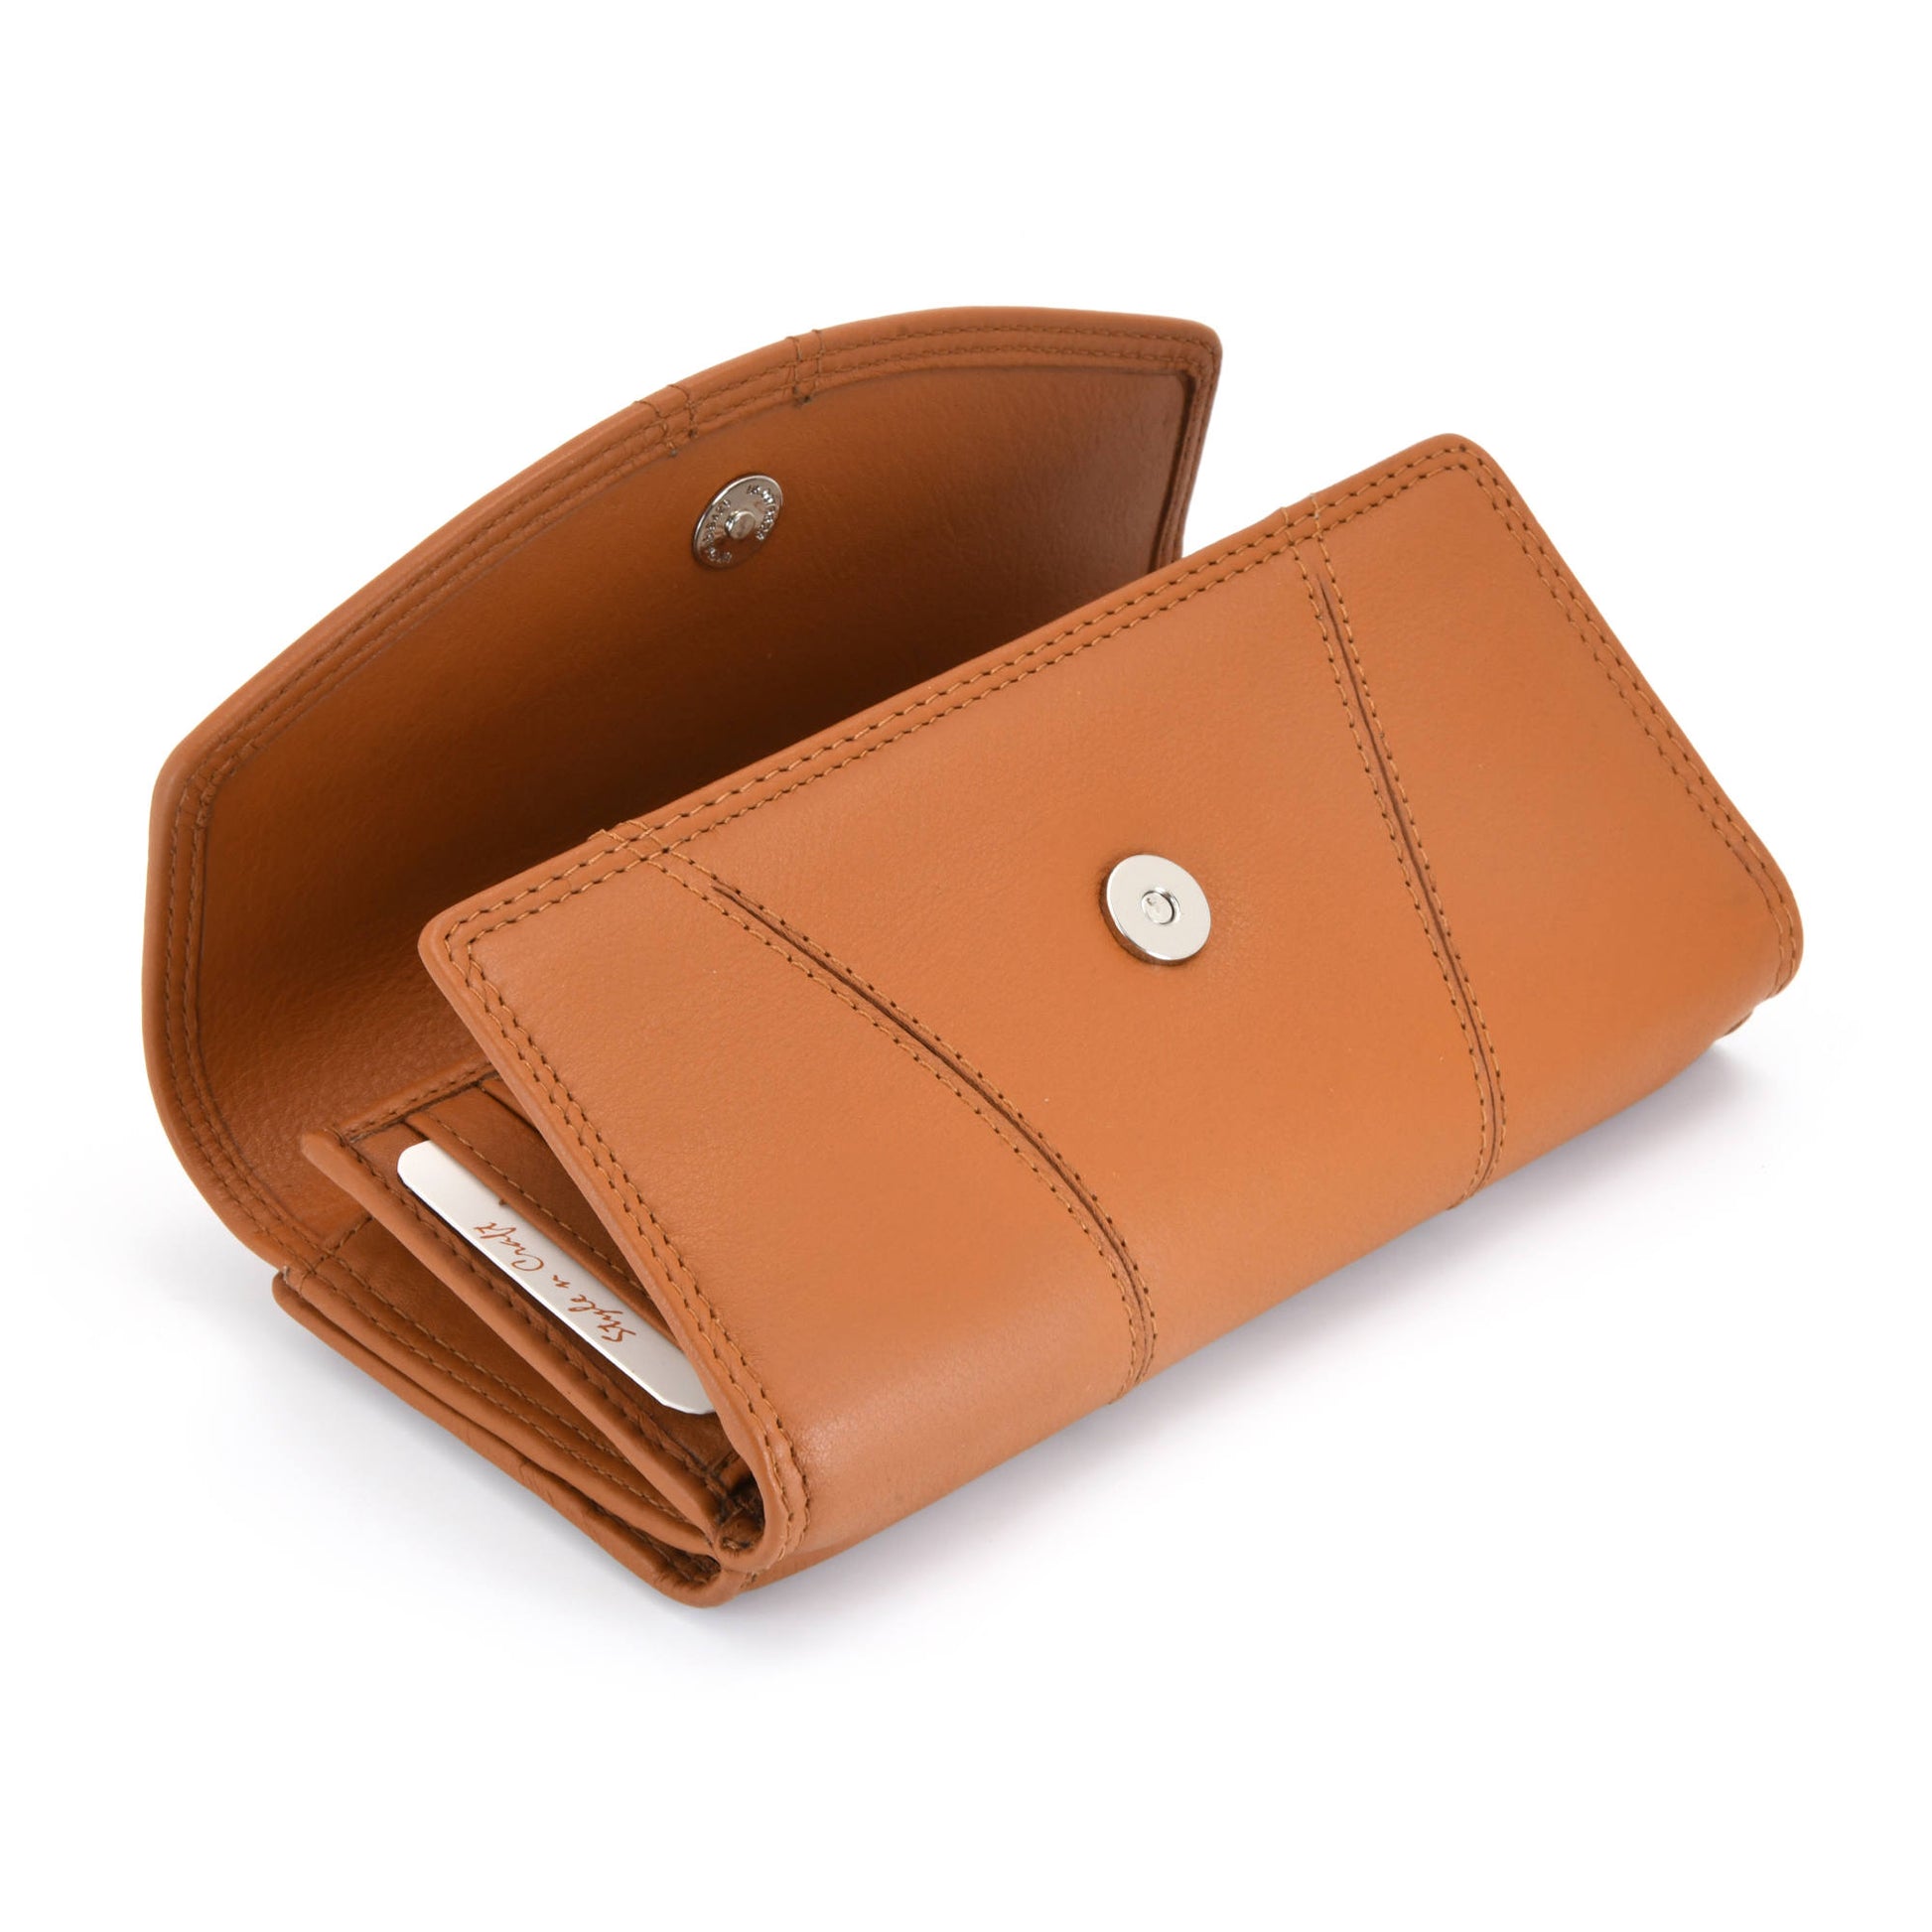 Style n Craft 300954-CG Clutch Wallet for Ladies in Cow Leather - Tan Color - Front Half Opened Angled View